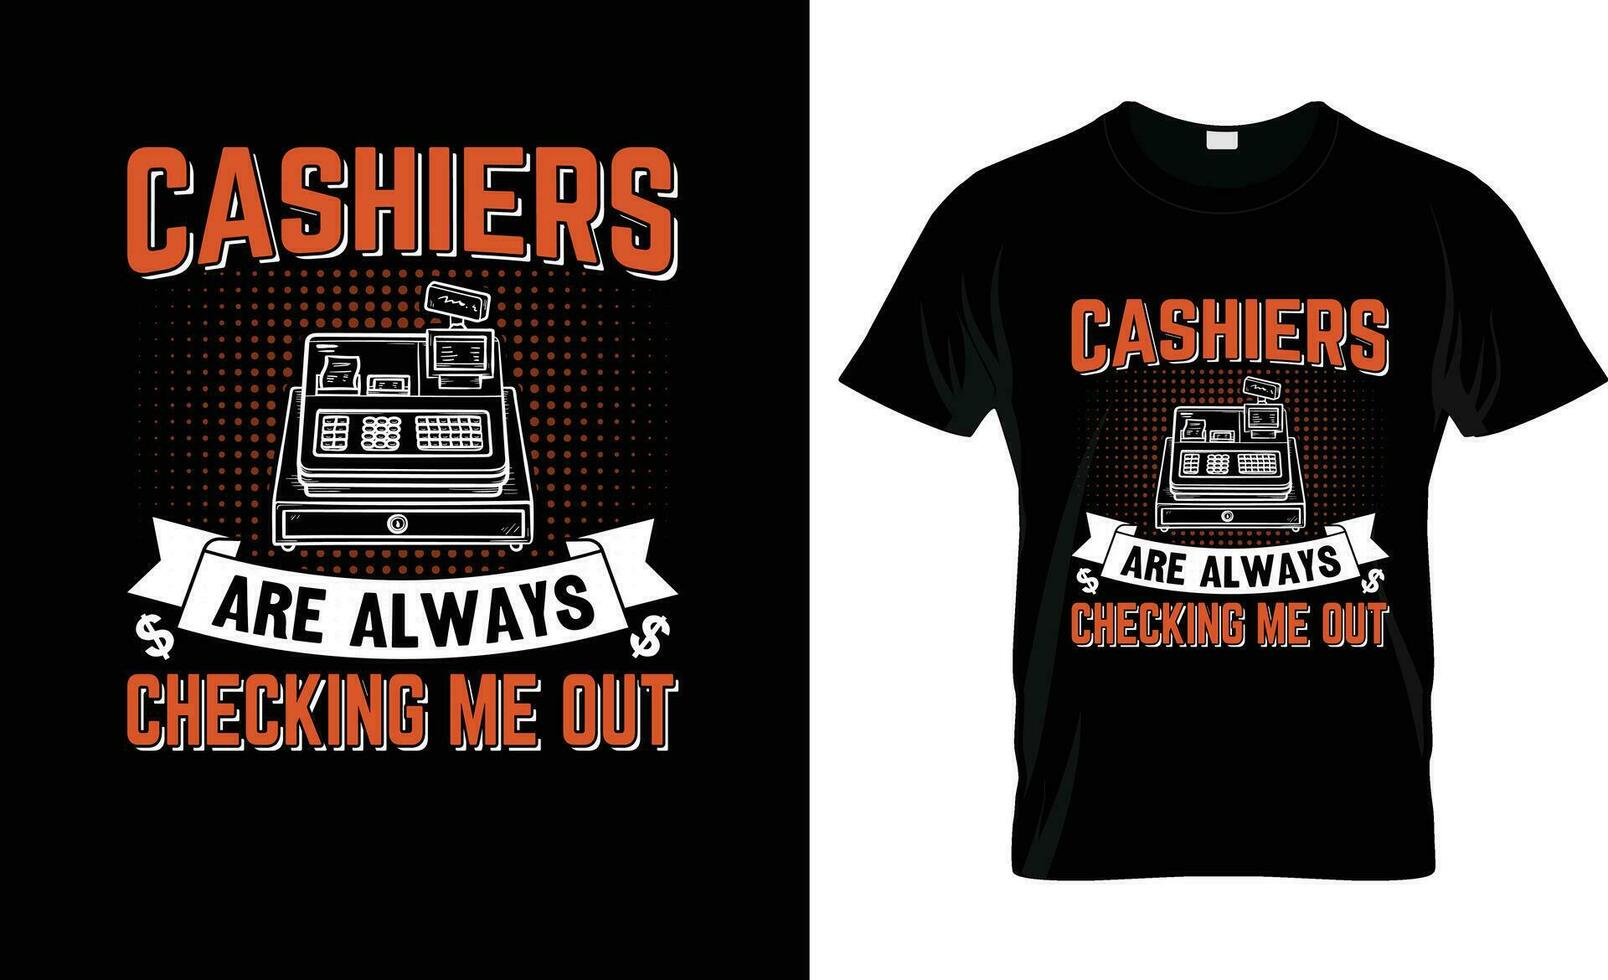 cashiers are always checking me out colorful Graphic T-Shirt,  t-shirt print mockup vector